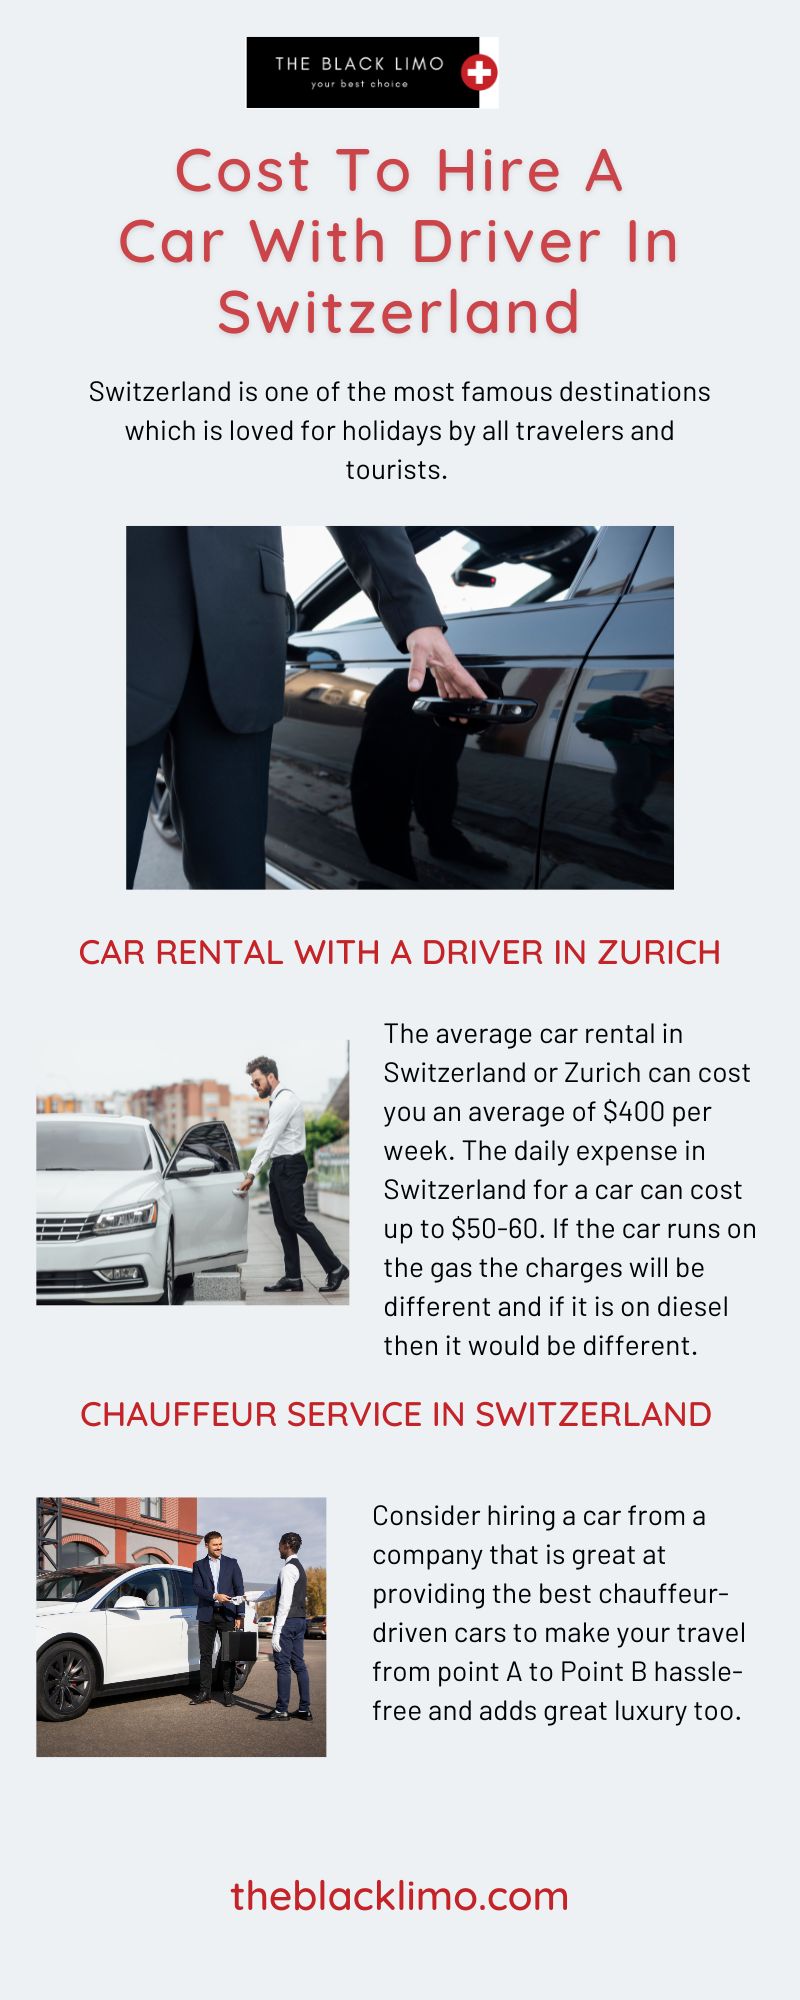 Cost To Hire A Car With Driver In Switzerland